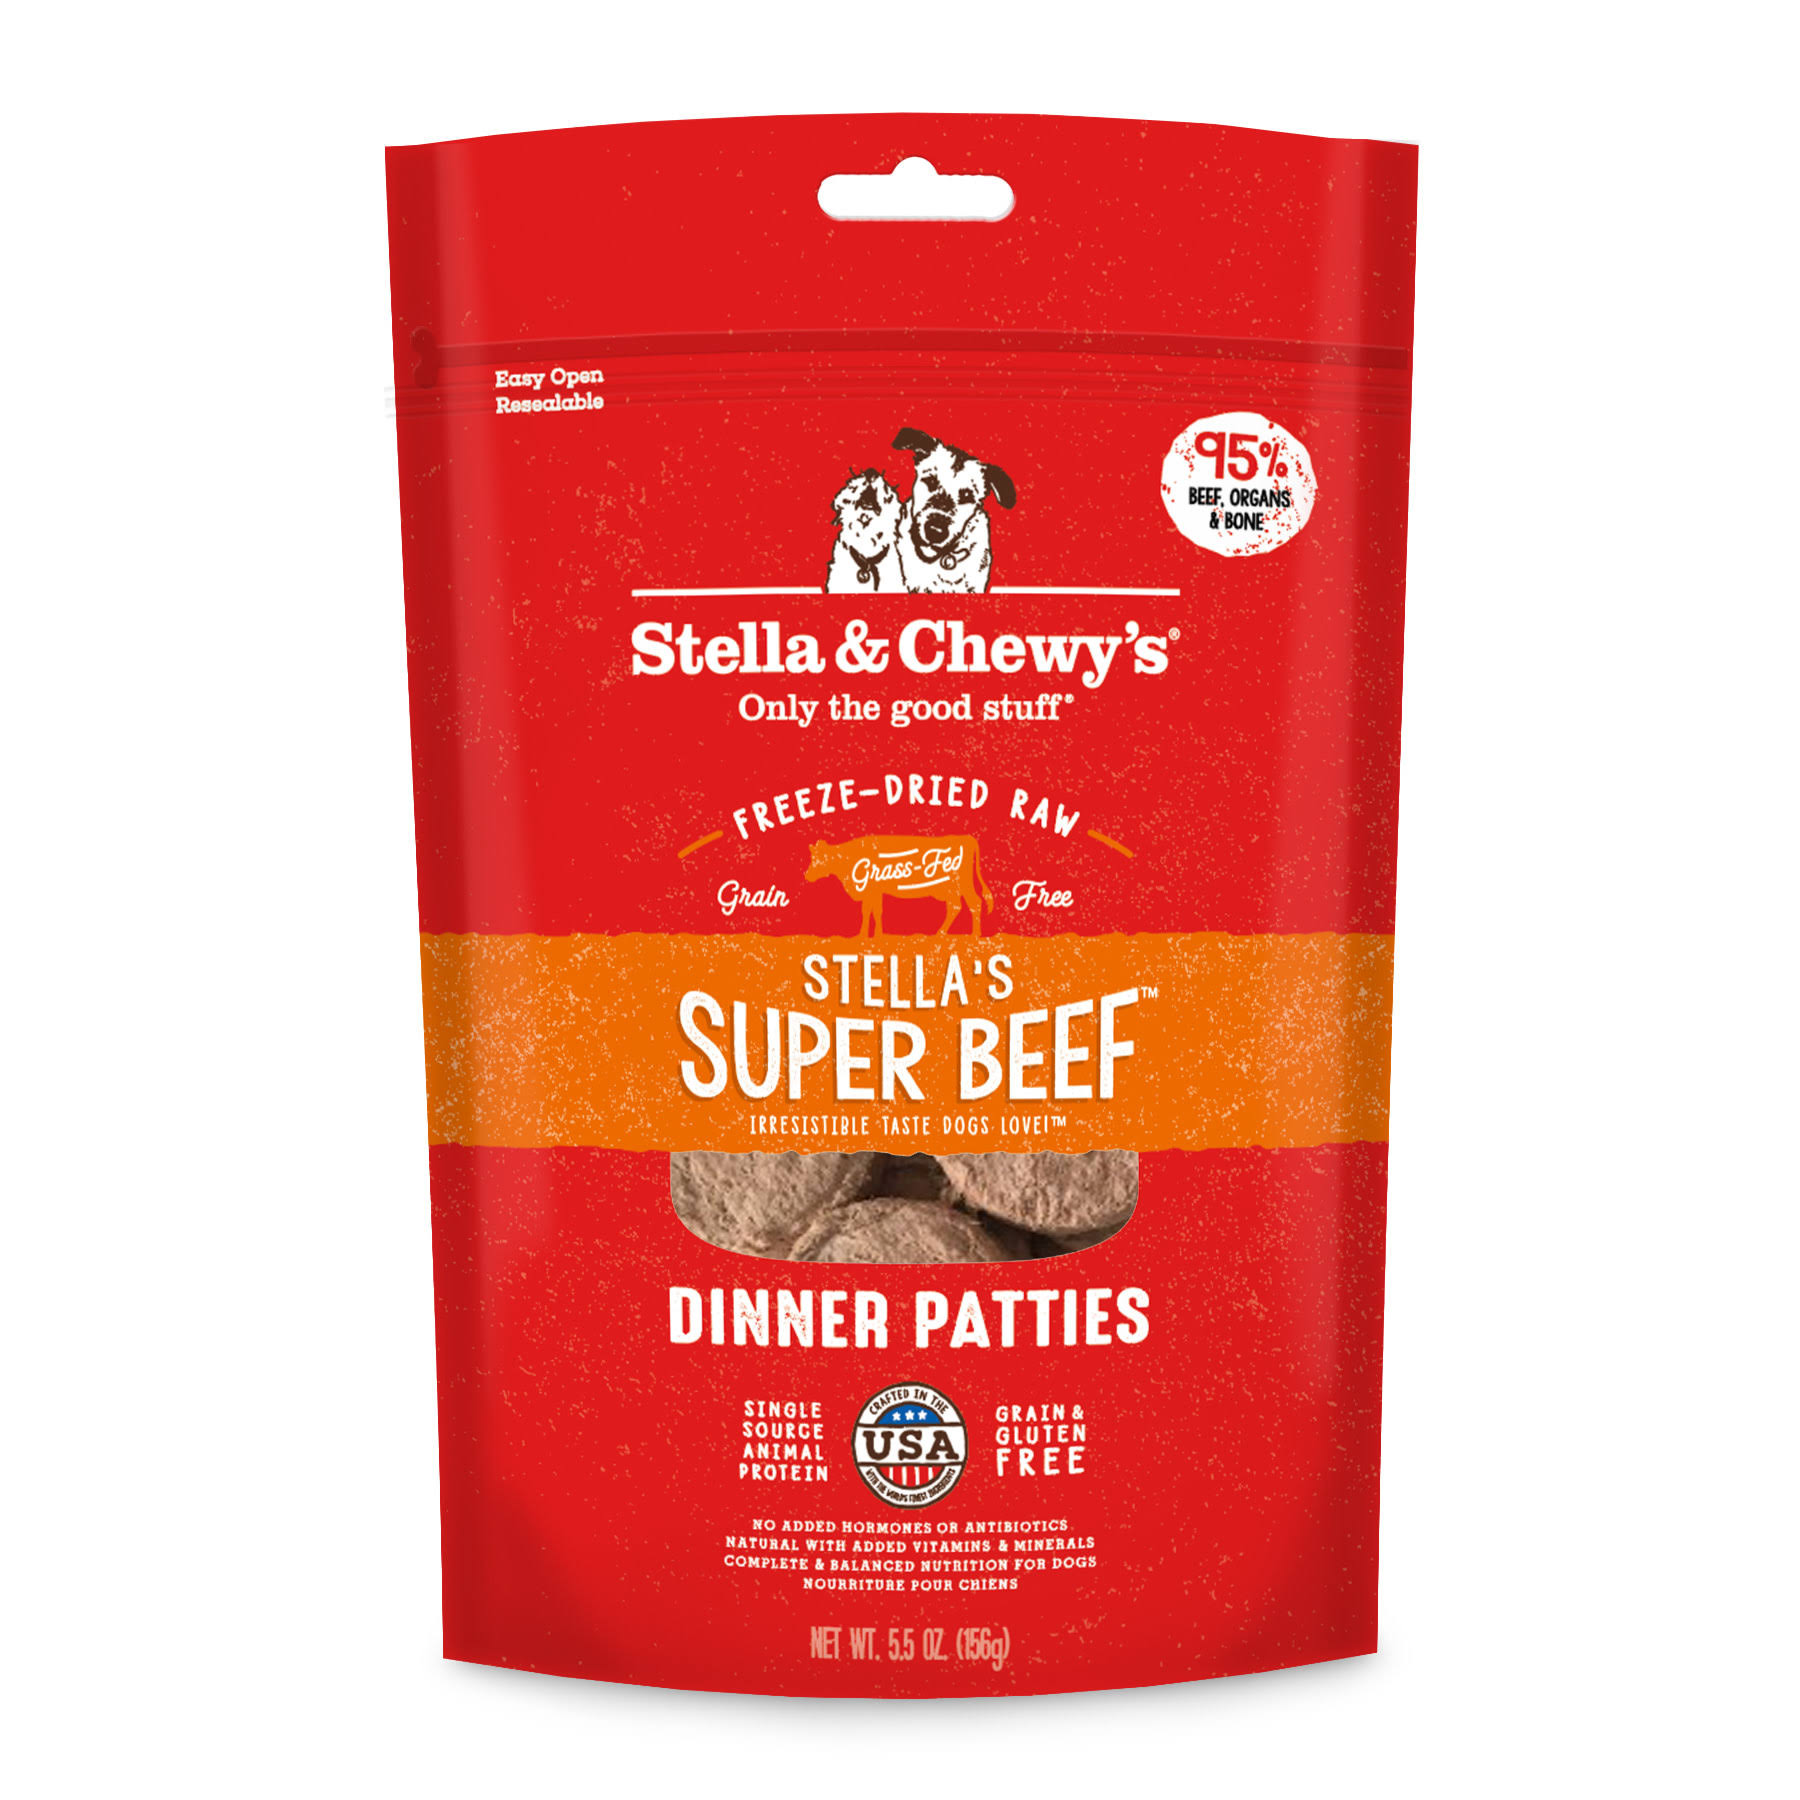 Stella & Chewy's Freeze Dried Dog Food - Stella's Super Beef Dinner